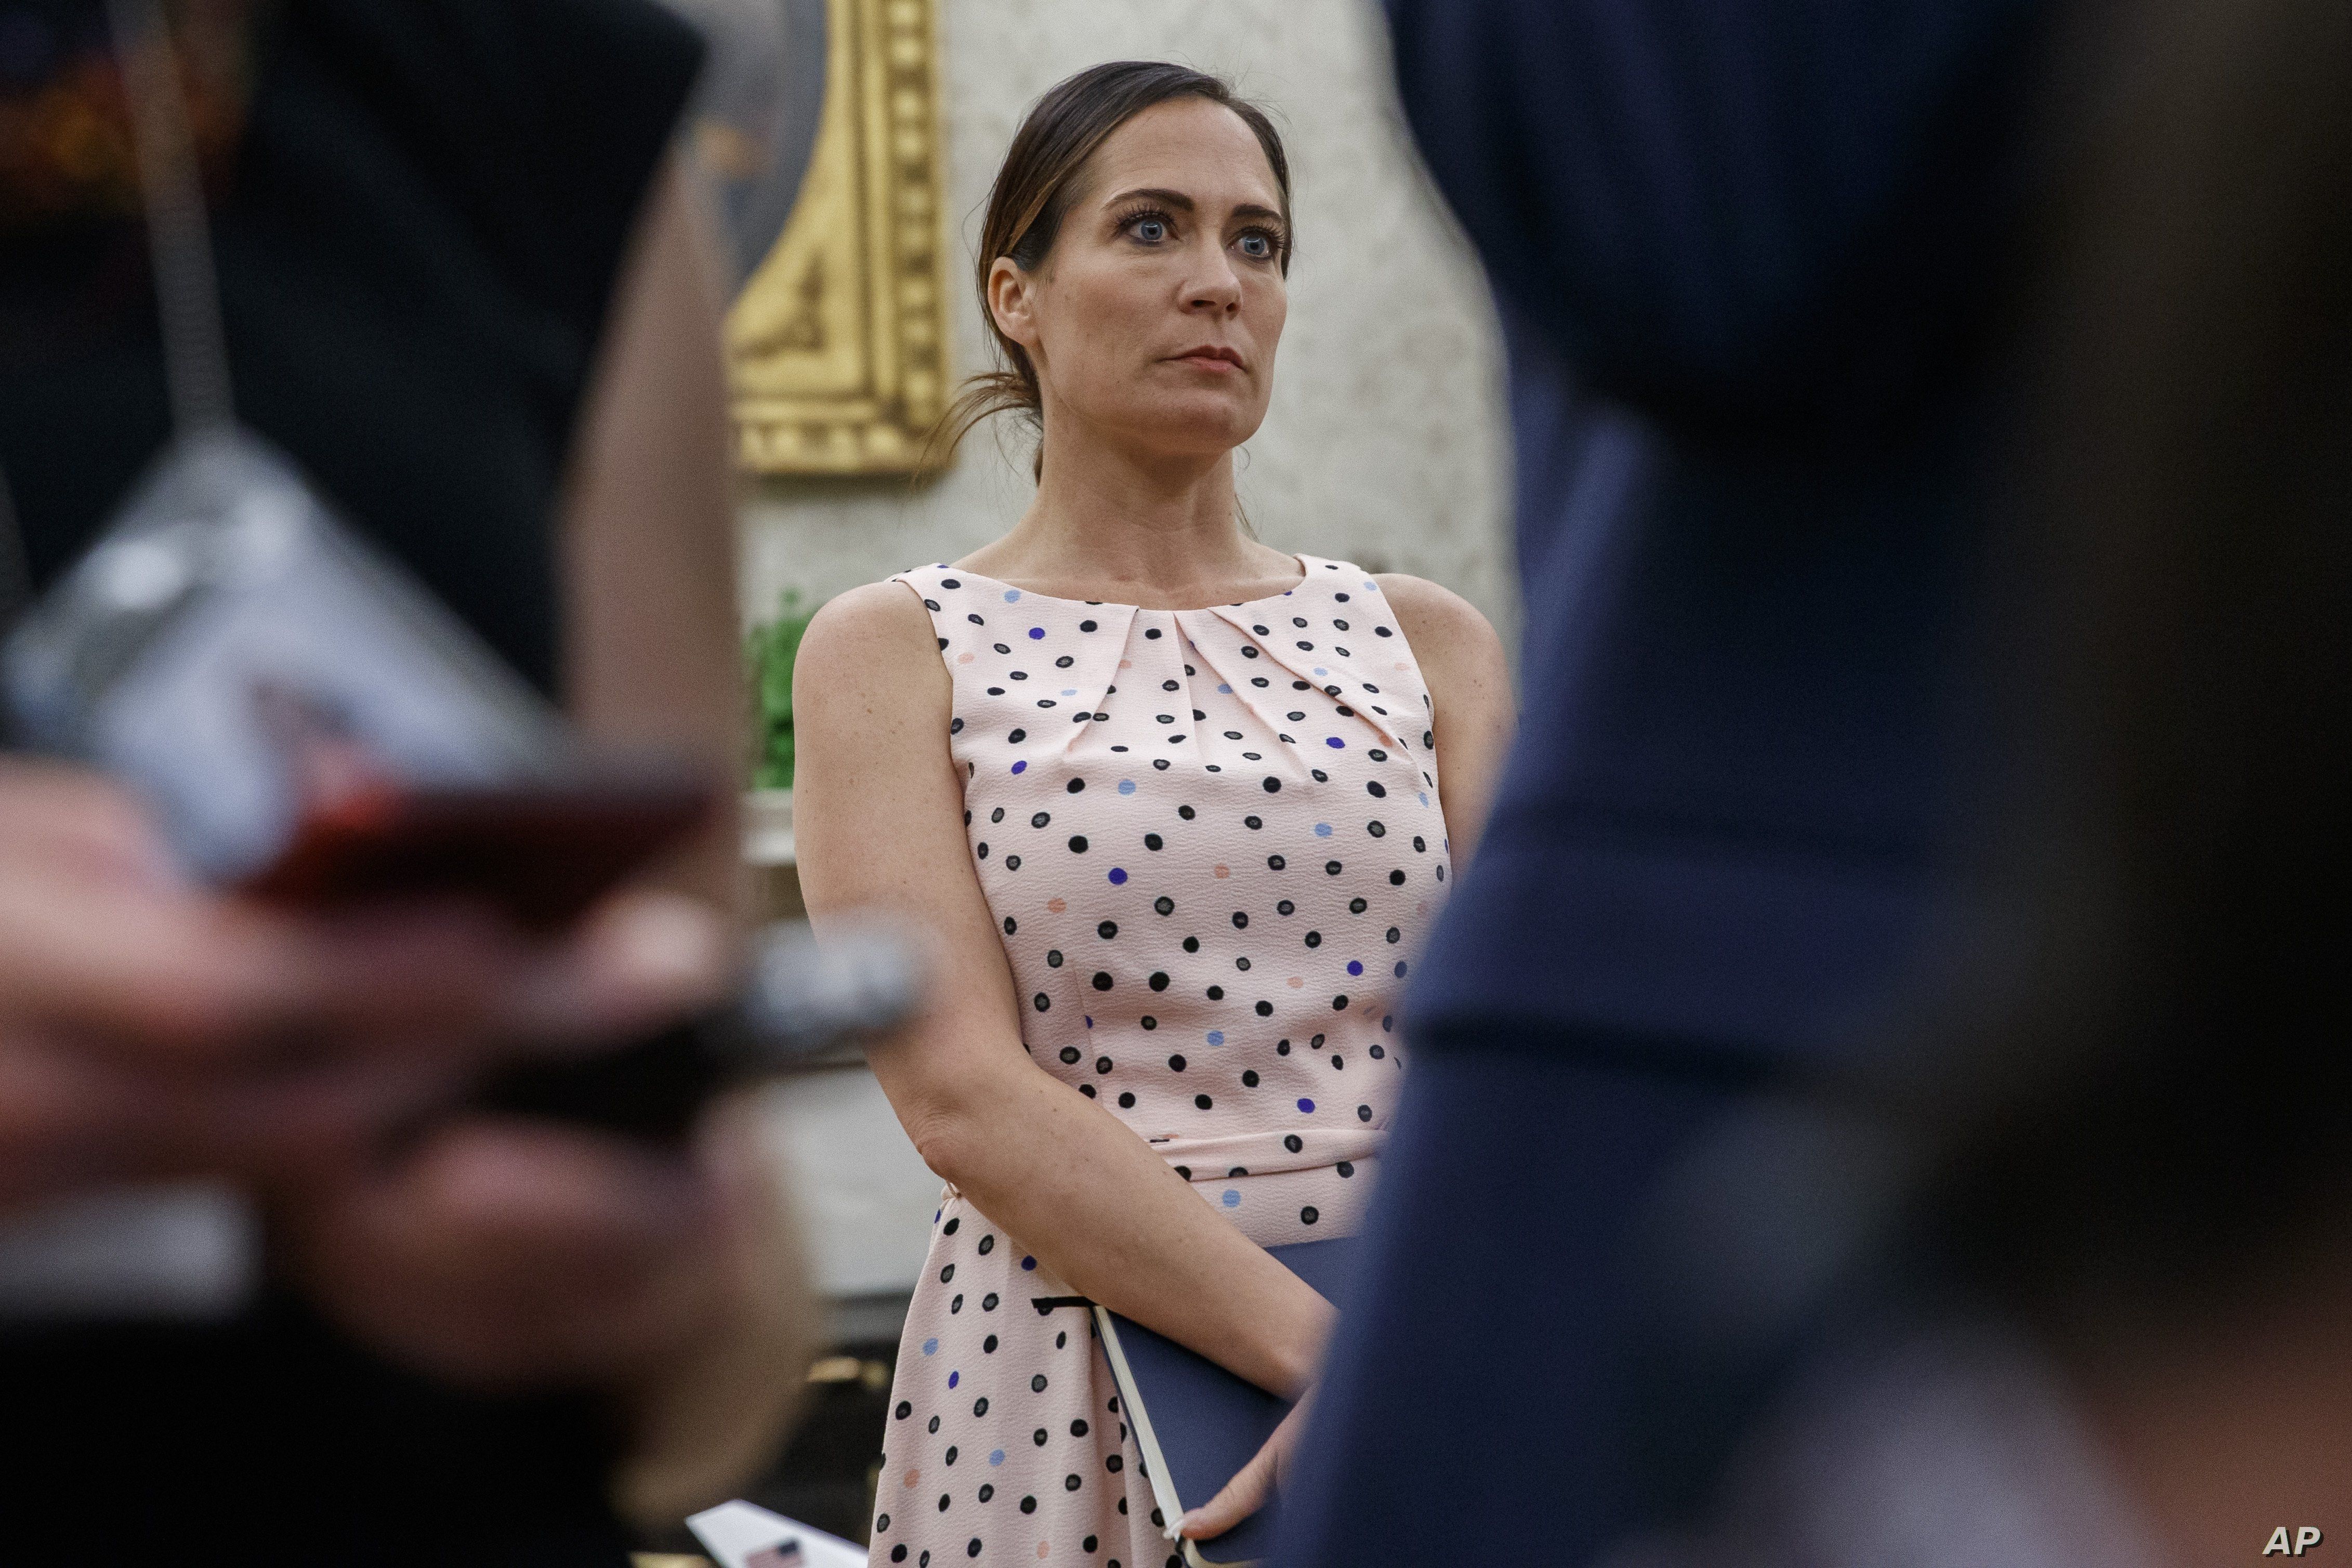 White House press secretary Stephanie Grisham, listens as President Donald Trump speaks with reporters on the South Lawn of the White House before departing, Wednesday, July 17, 2019, in Washington. (AP Photo/Alex Brandon)